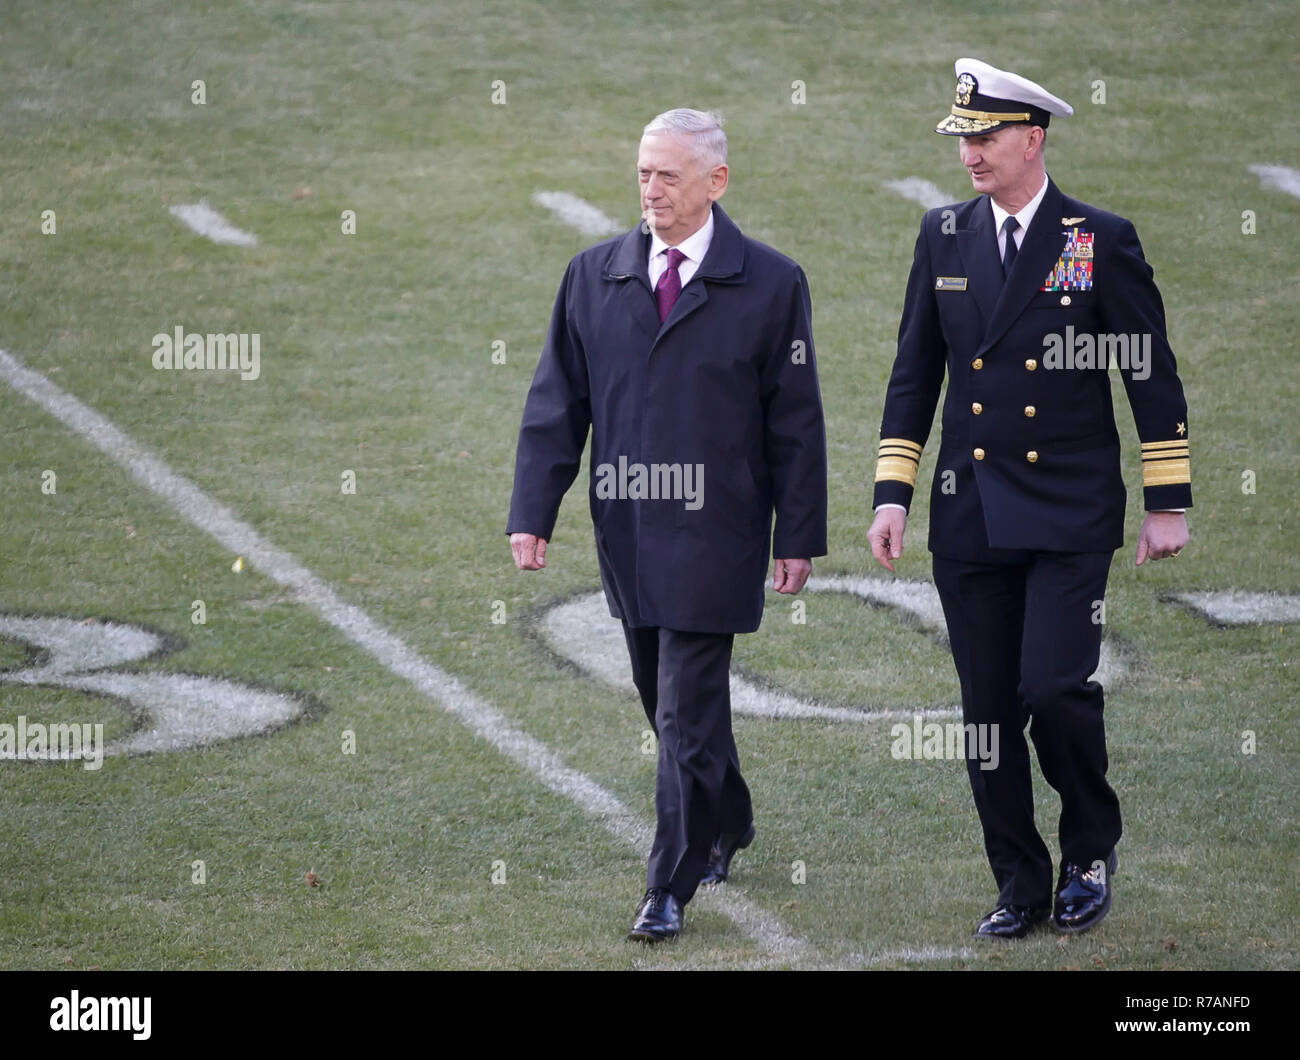 Philadelphia, USA. 8th Dec, 2018. Secretary of Defense, Jim Mattis, and Superintendent of the Naval Academy, Vice Admiral Walter E. Carter Jr., walk toward Navy's bench before the 119th Army Navy game at Lincoln Financial Field in Philadelphia, USA. Justin Cooper/CSM/Alamy Live News Stock Photo